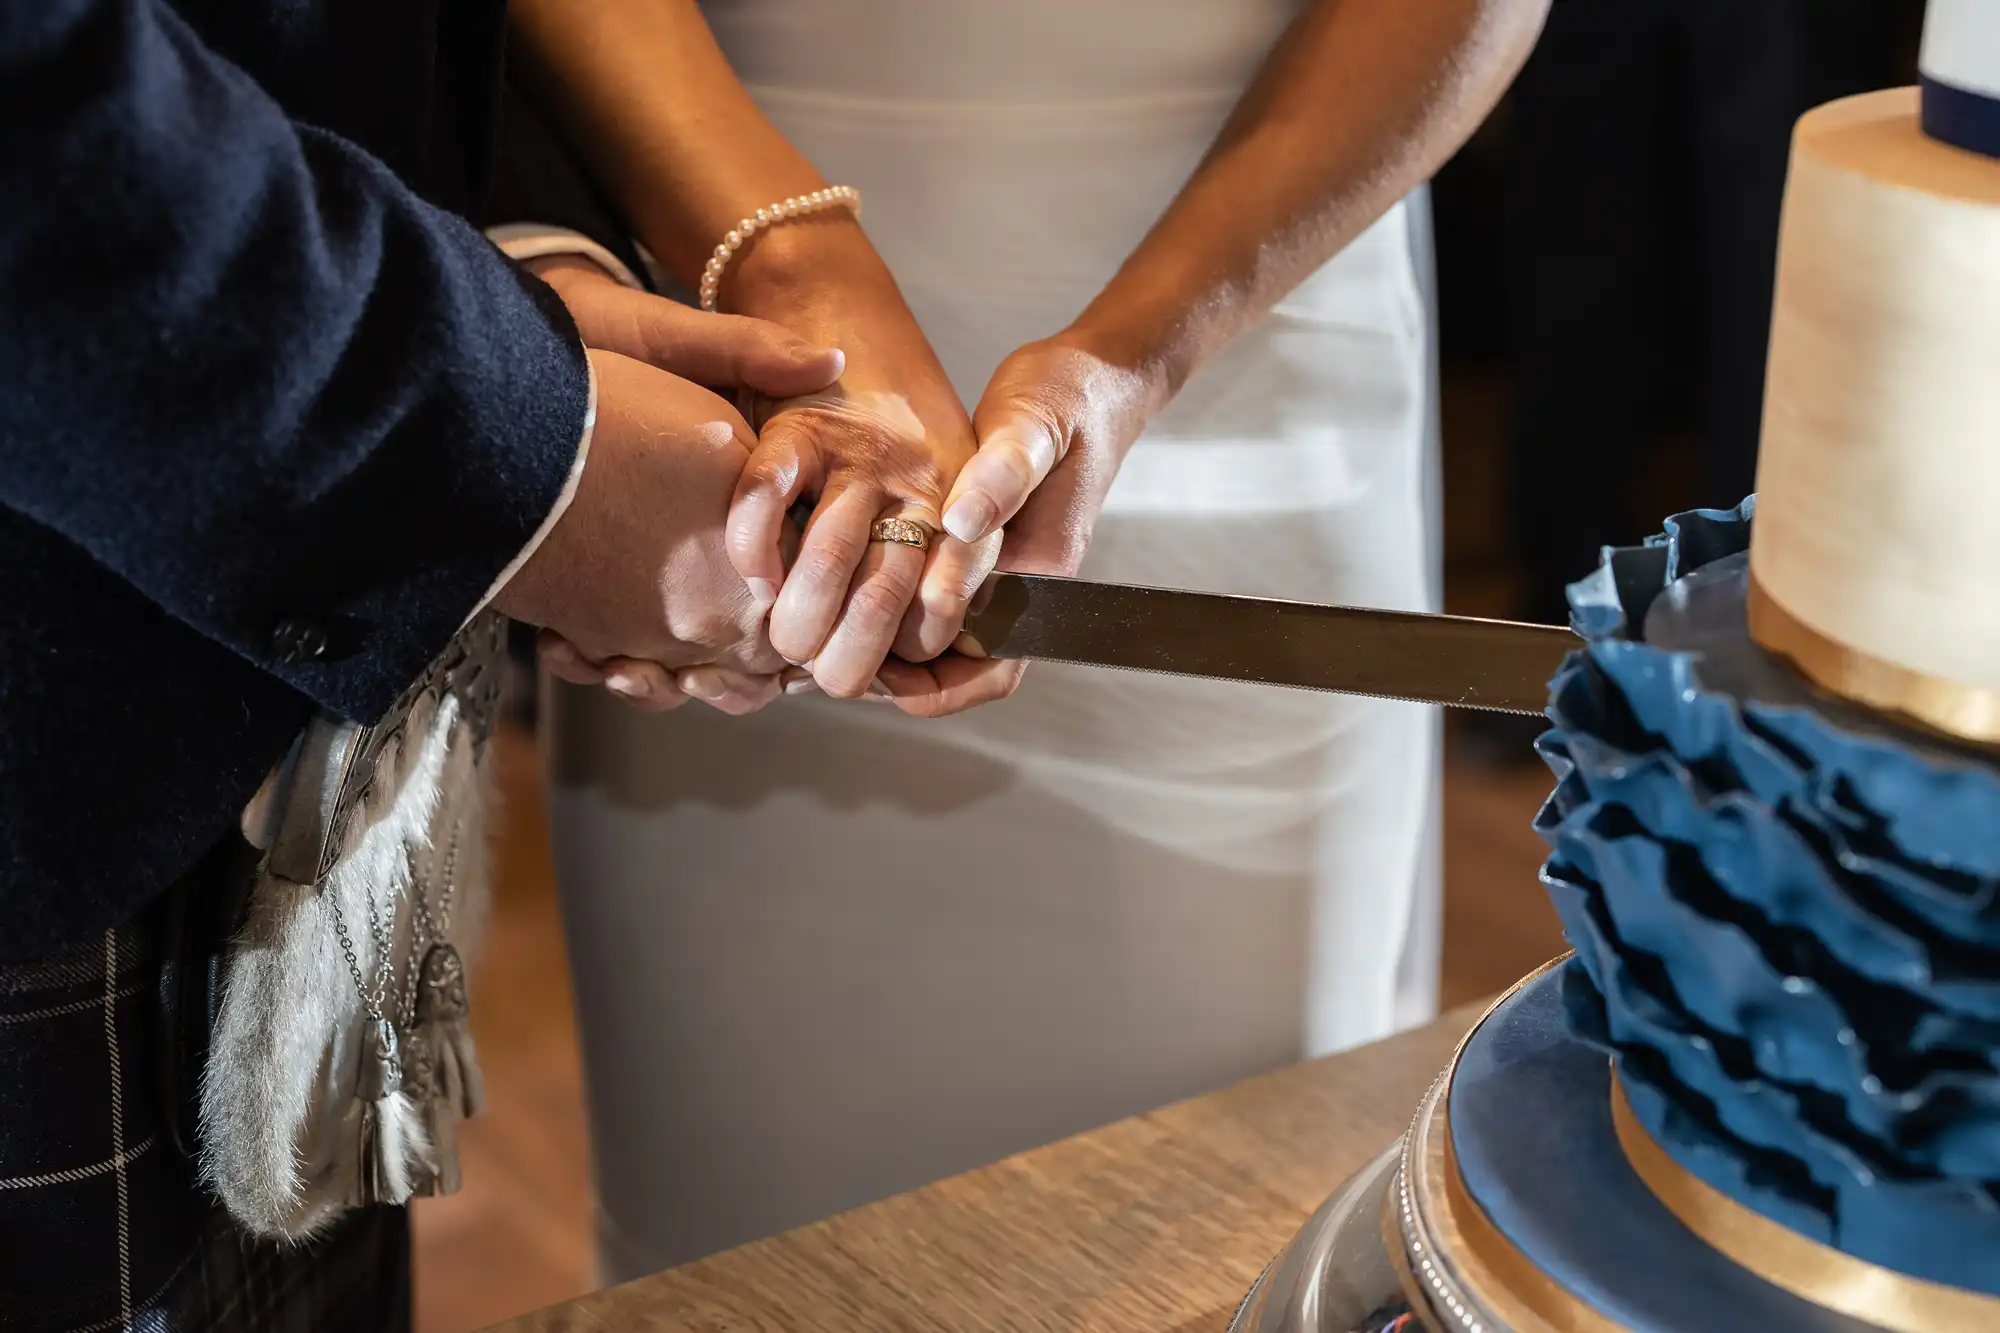 A newlywed couple in ceremonial attire cutting a multi-tiered wedding cake together.